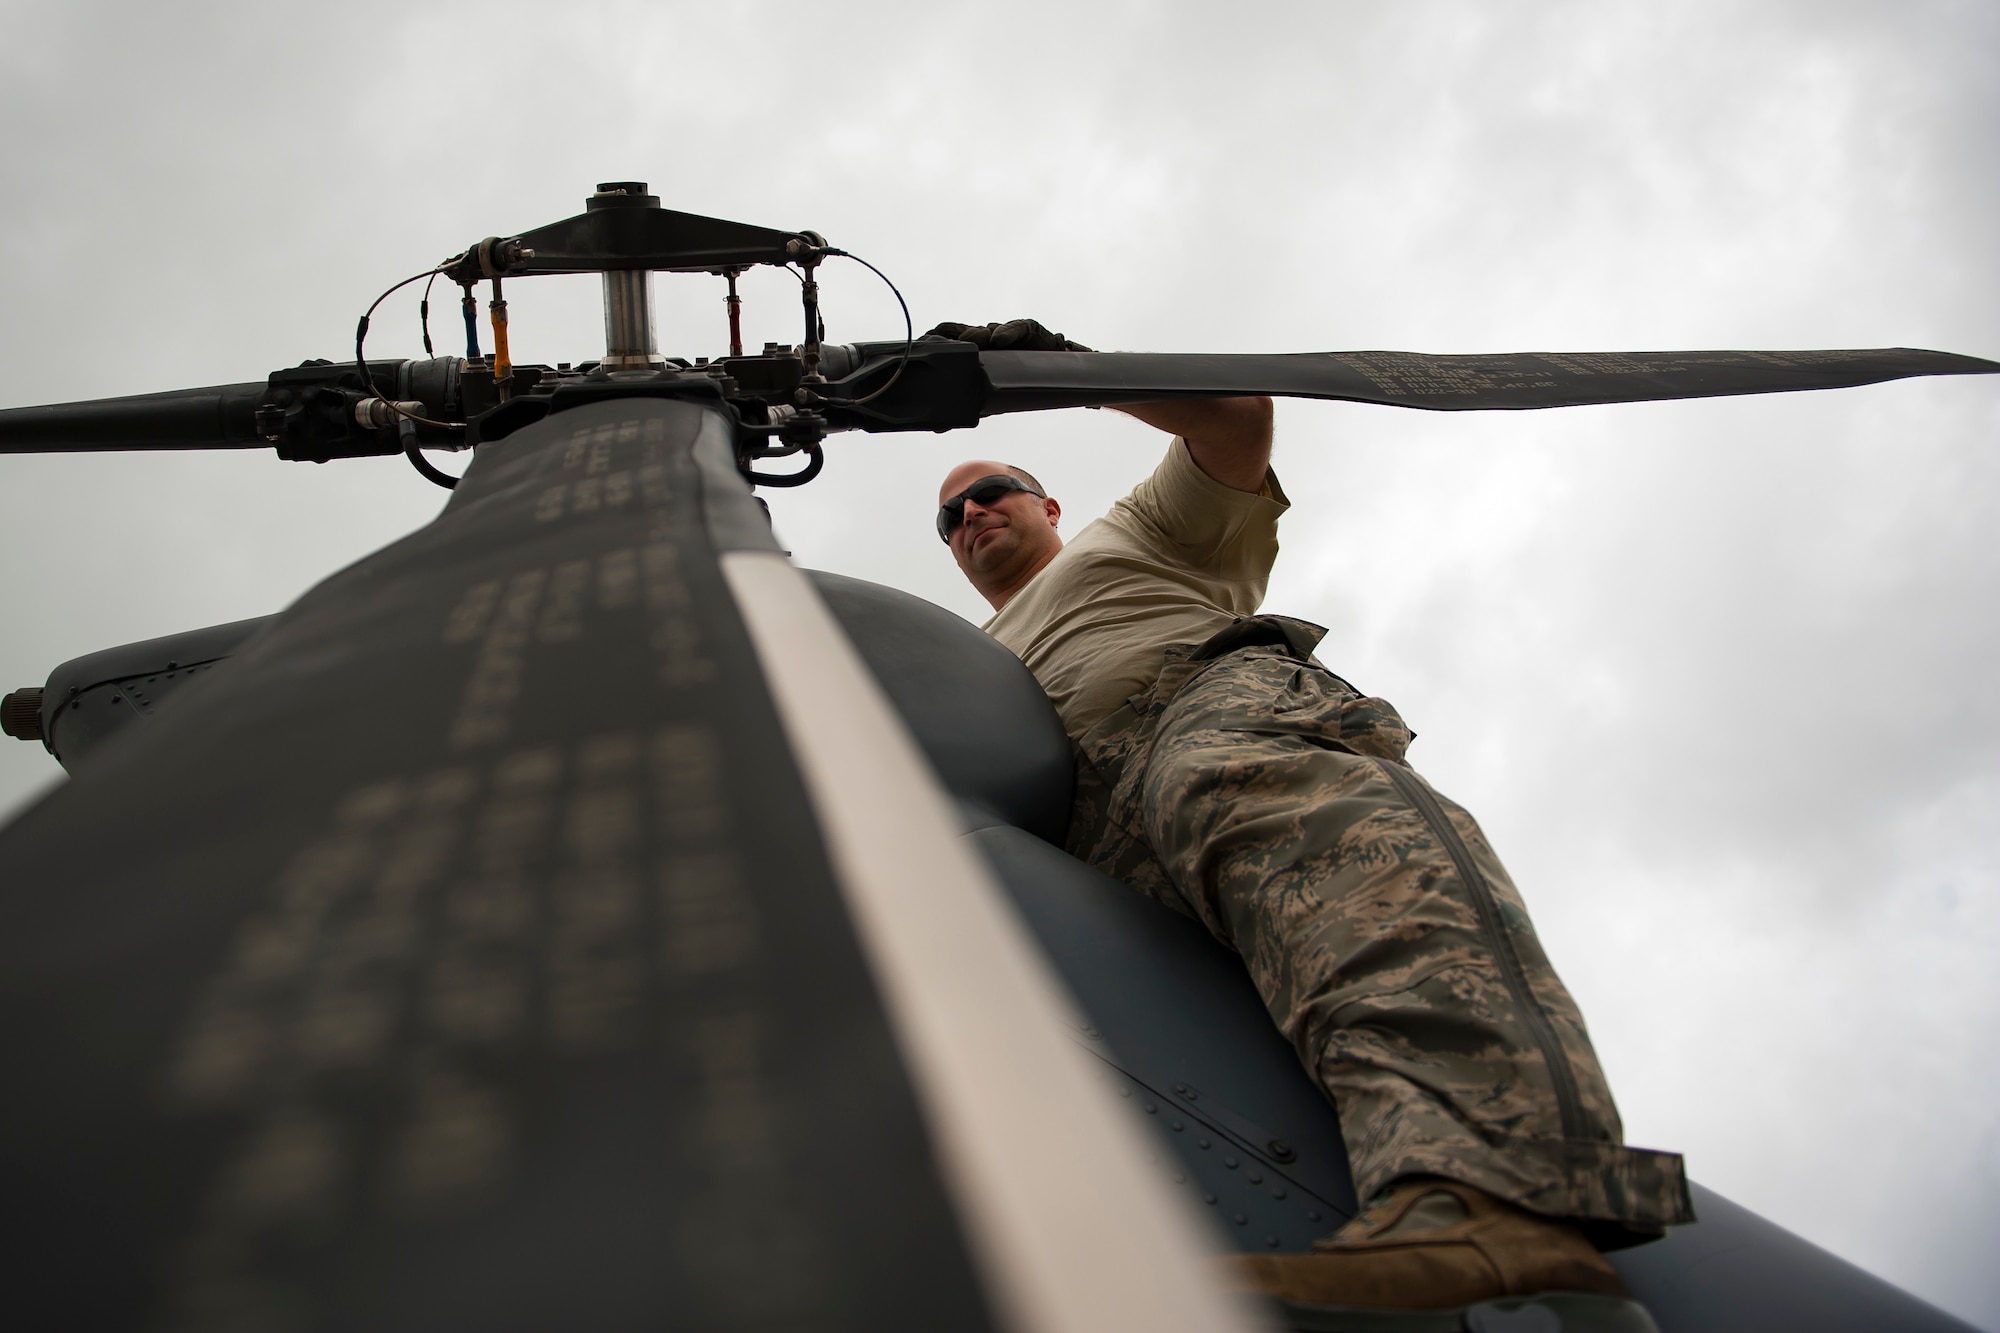 Tech. Sgt. Nicholas Barbieri, an Air Force Reserve Citizen Airmen from the 920th Rescue Wing out of Patrick Air Force Base in Cocoa Beach, Florida, inspects an HH-60G Pave Hawk helicopter on May 27th, 2018 during the 2nd annual Salute to American Heroes Air and Sea Show, in Miami. This two-day event showcases military fighter jets and other aircraft and equipment from all branches of the United States military in observance of Memorial Day, honoring servicemembers who have made the ultimate sacrifice. (U.S. Air Force photo/Staff Sgt. Jared Trimarchi)